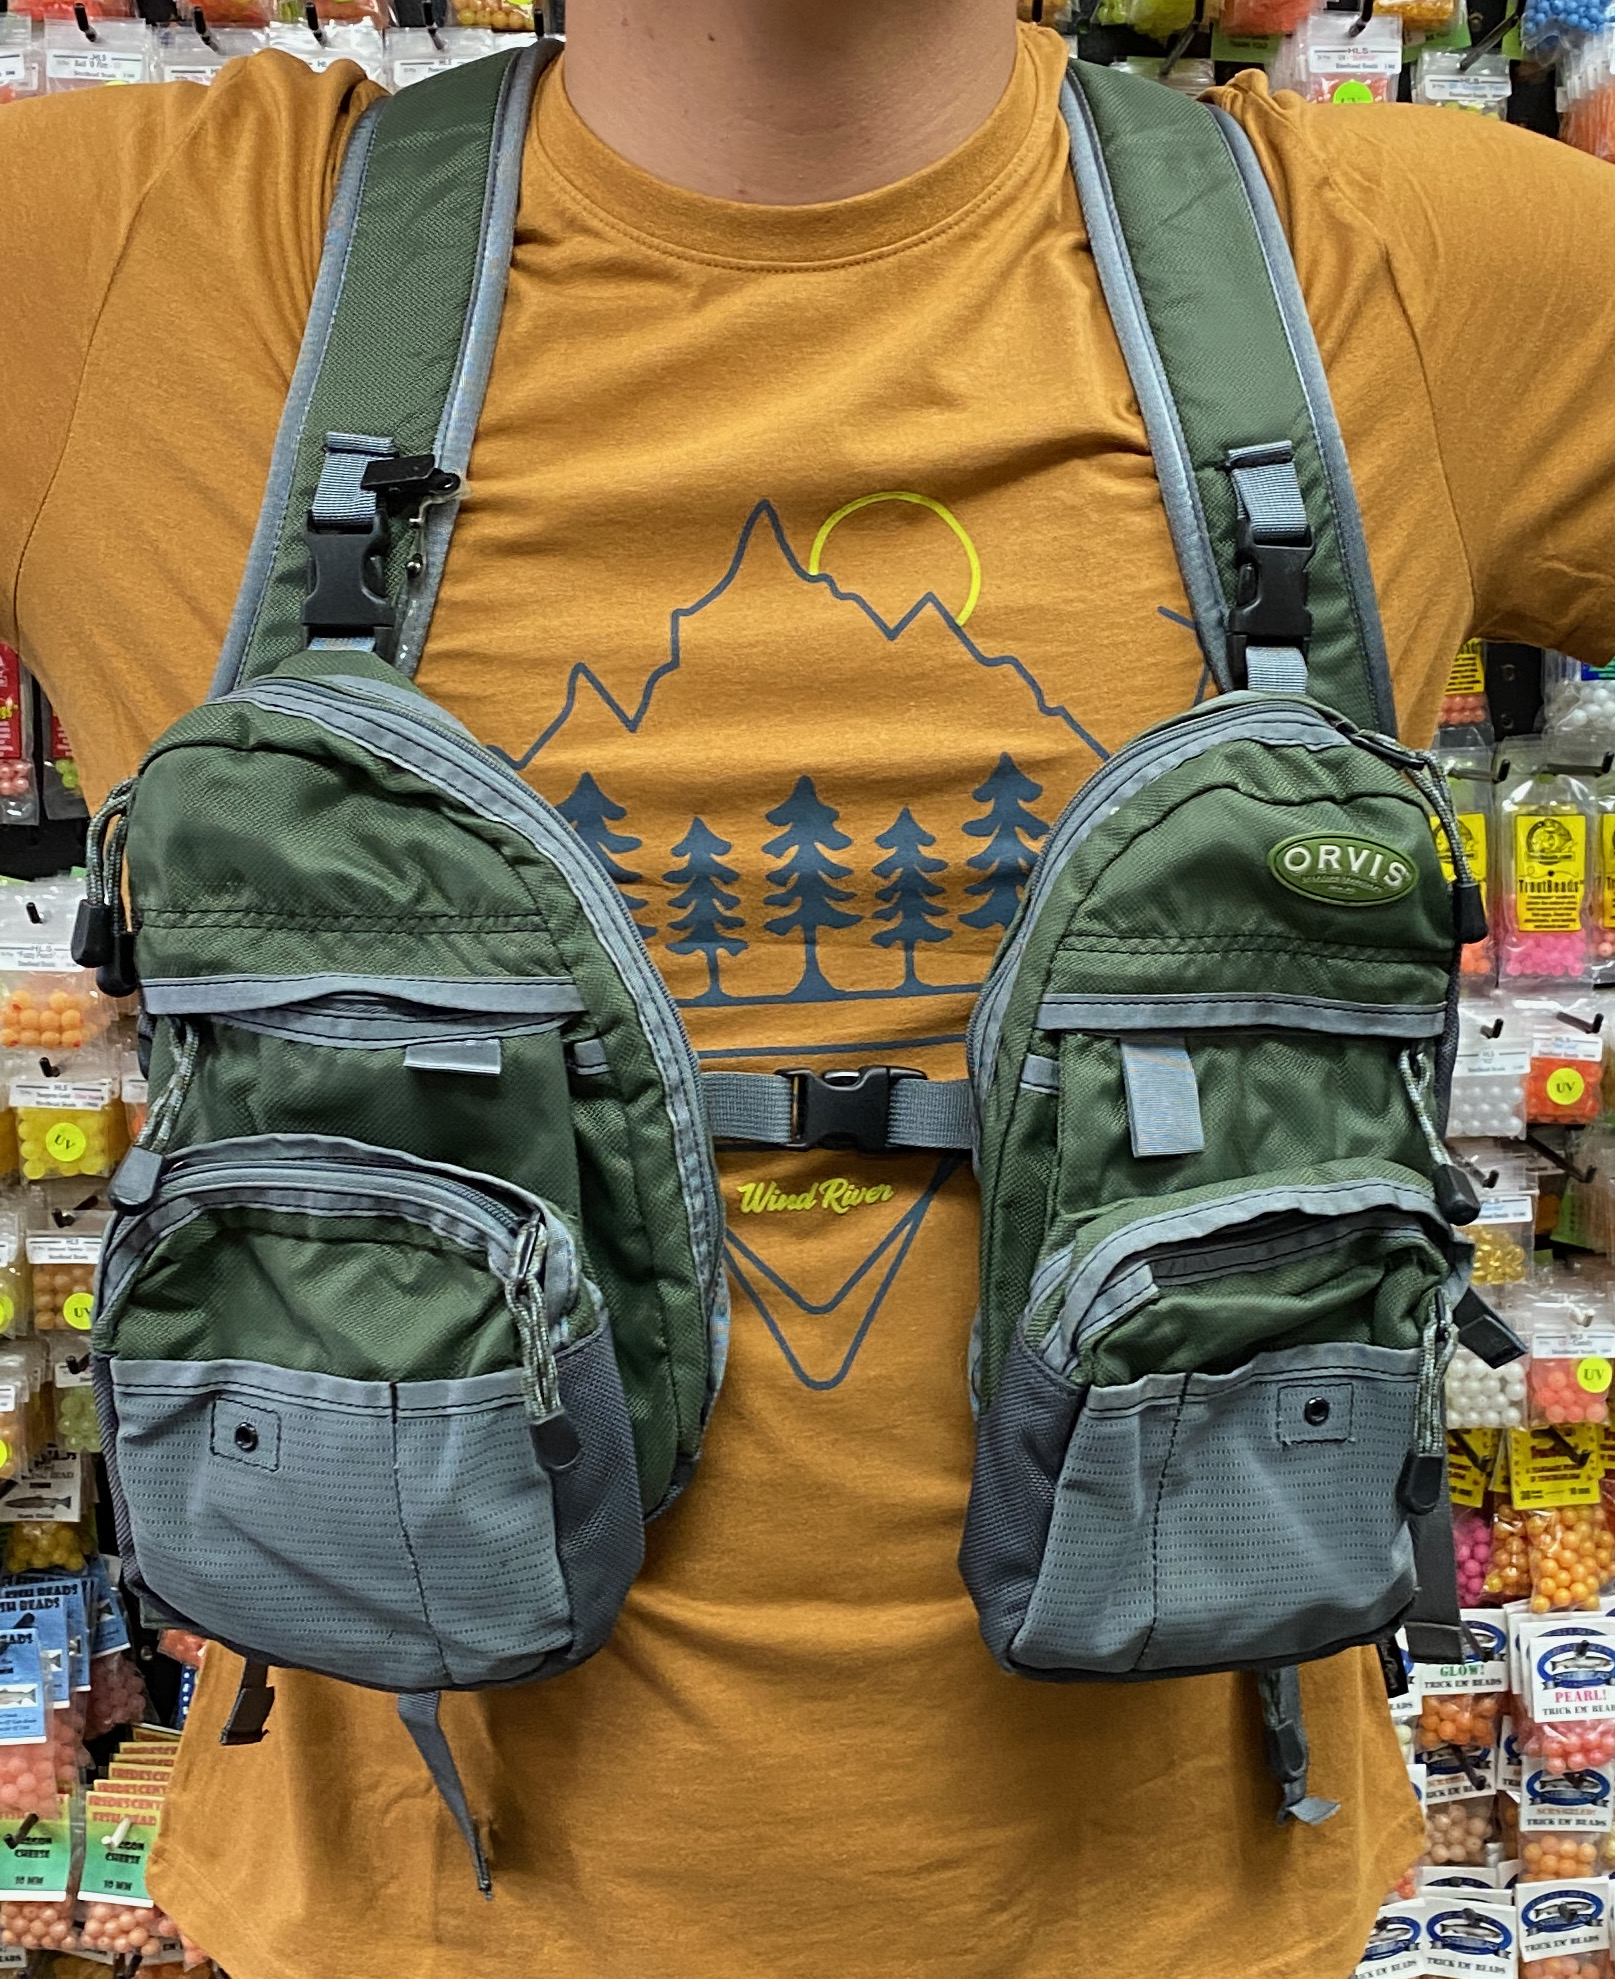 SOLD! – NEW PRICE! – Orvis Chest & Backpack Combo – LIKE NEW